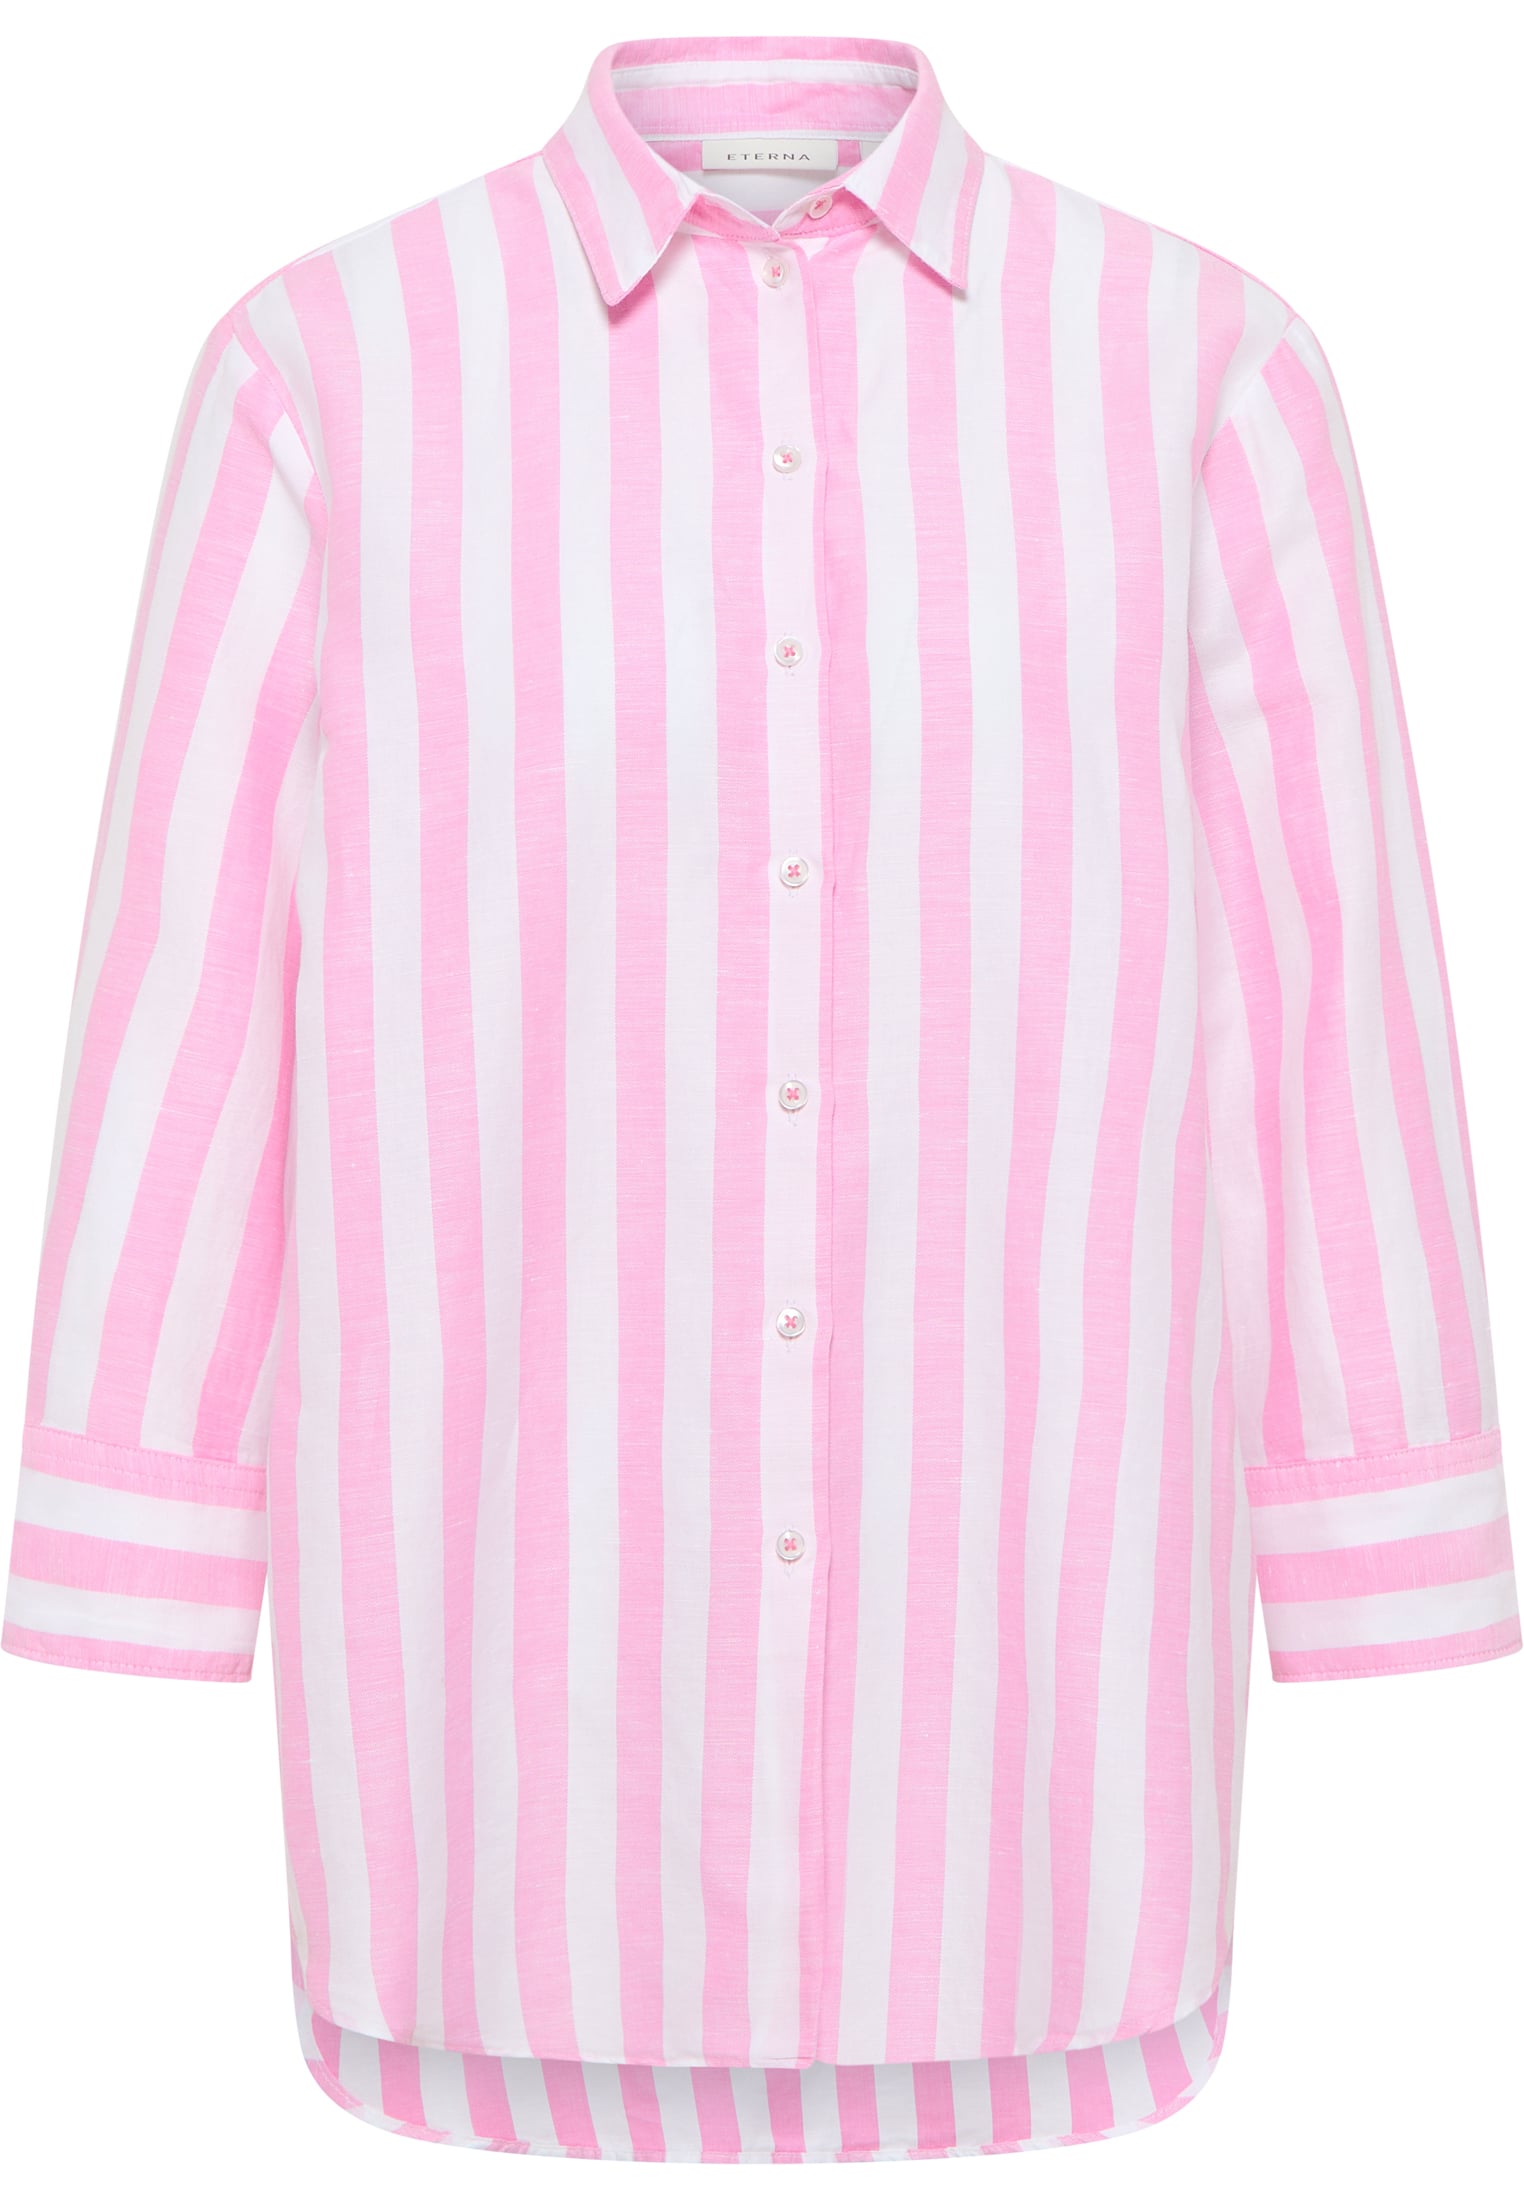 | 3/4 36 in 2BL03967-15-11-36-3/4 striped sleeves rose | | shirt-blouse | rose